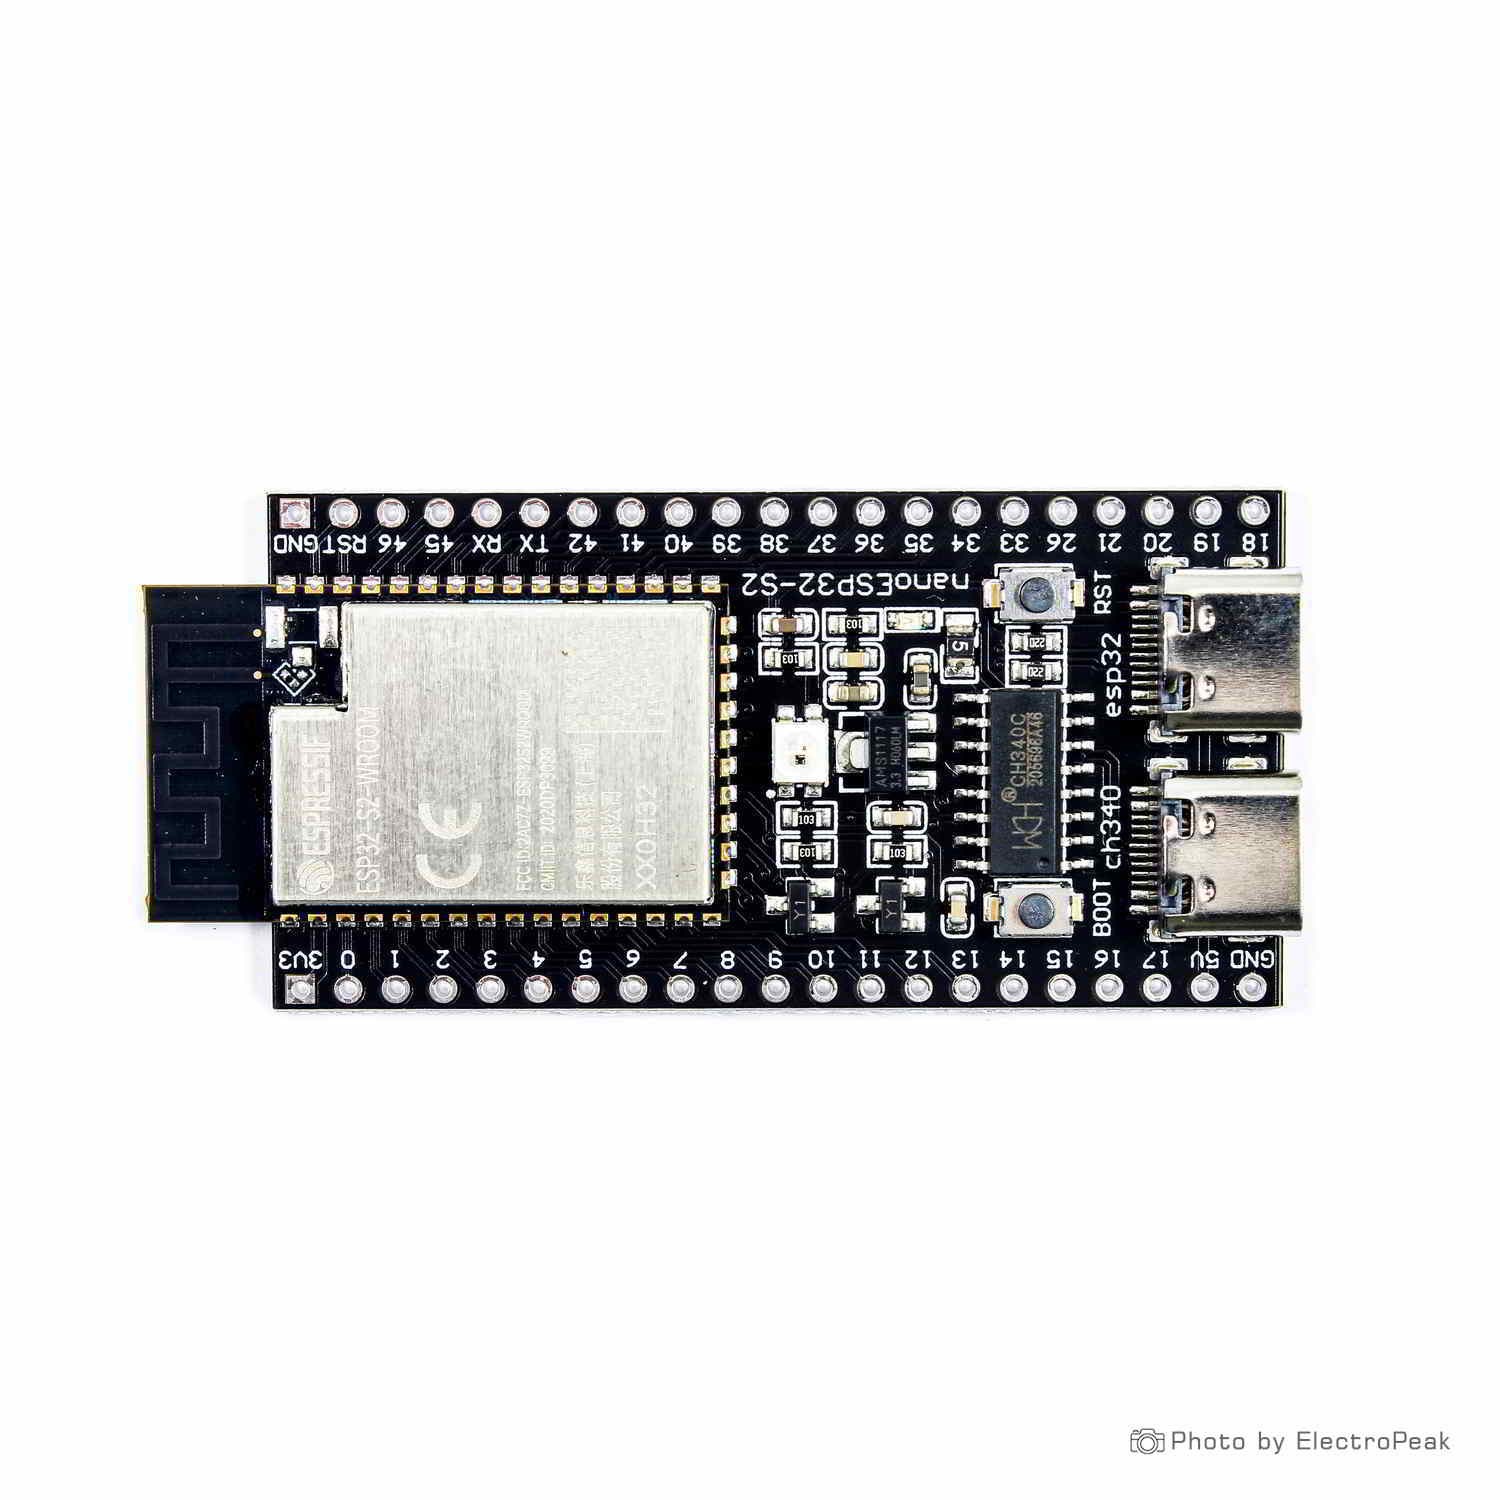 ESP32 Development Board (WIFI and Bluetooth) with Ch340 USB Type-C